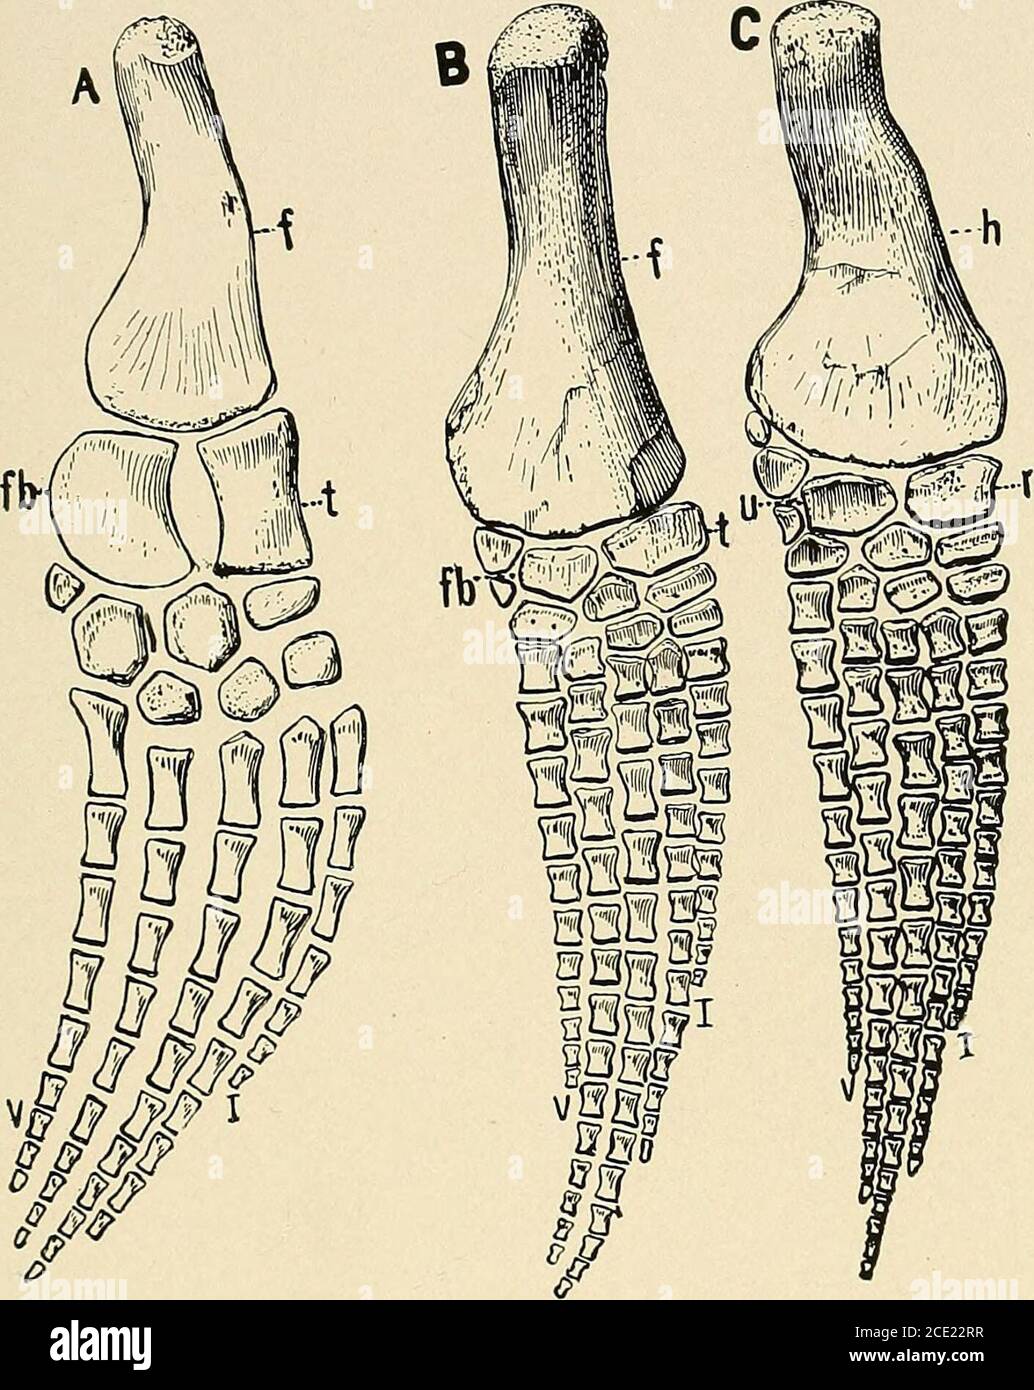 . Water reptiles of the past and present . Fig. 37.—Pelvic girdle of Elasmosaurus: p, pubis; is, ischium; il, ilium so long and strong; they are very short in the cetaceans, the sire-nians, the ichthyosaurs, mosasaurs, thalattosaurs, and the marinecrocodiles, in front at least. The strong muscular rugosities ofthe plesiosaurian bones are very suggestive of powerful swimmingmuscles. The bones of the forearms and legs, the wrists and ankles areall polygonal platelets of bones, closely articulating with each other.The finger and toe bones have a more elongated, hour-glass shapethan those of the i Stock Photo